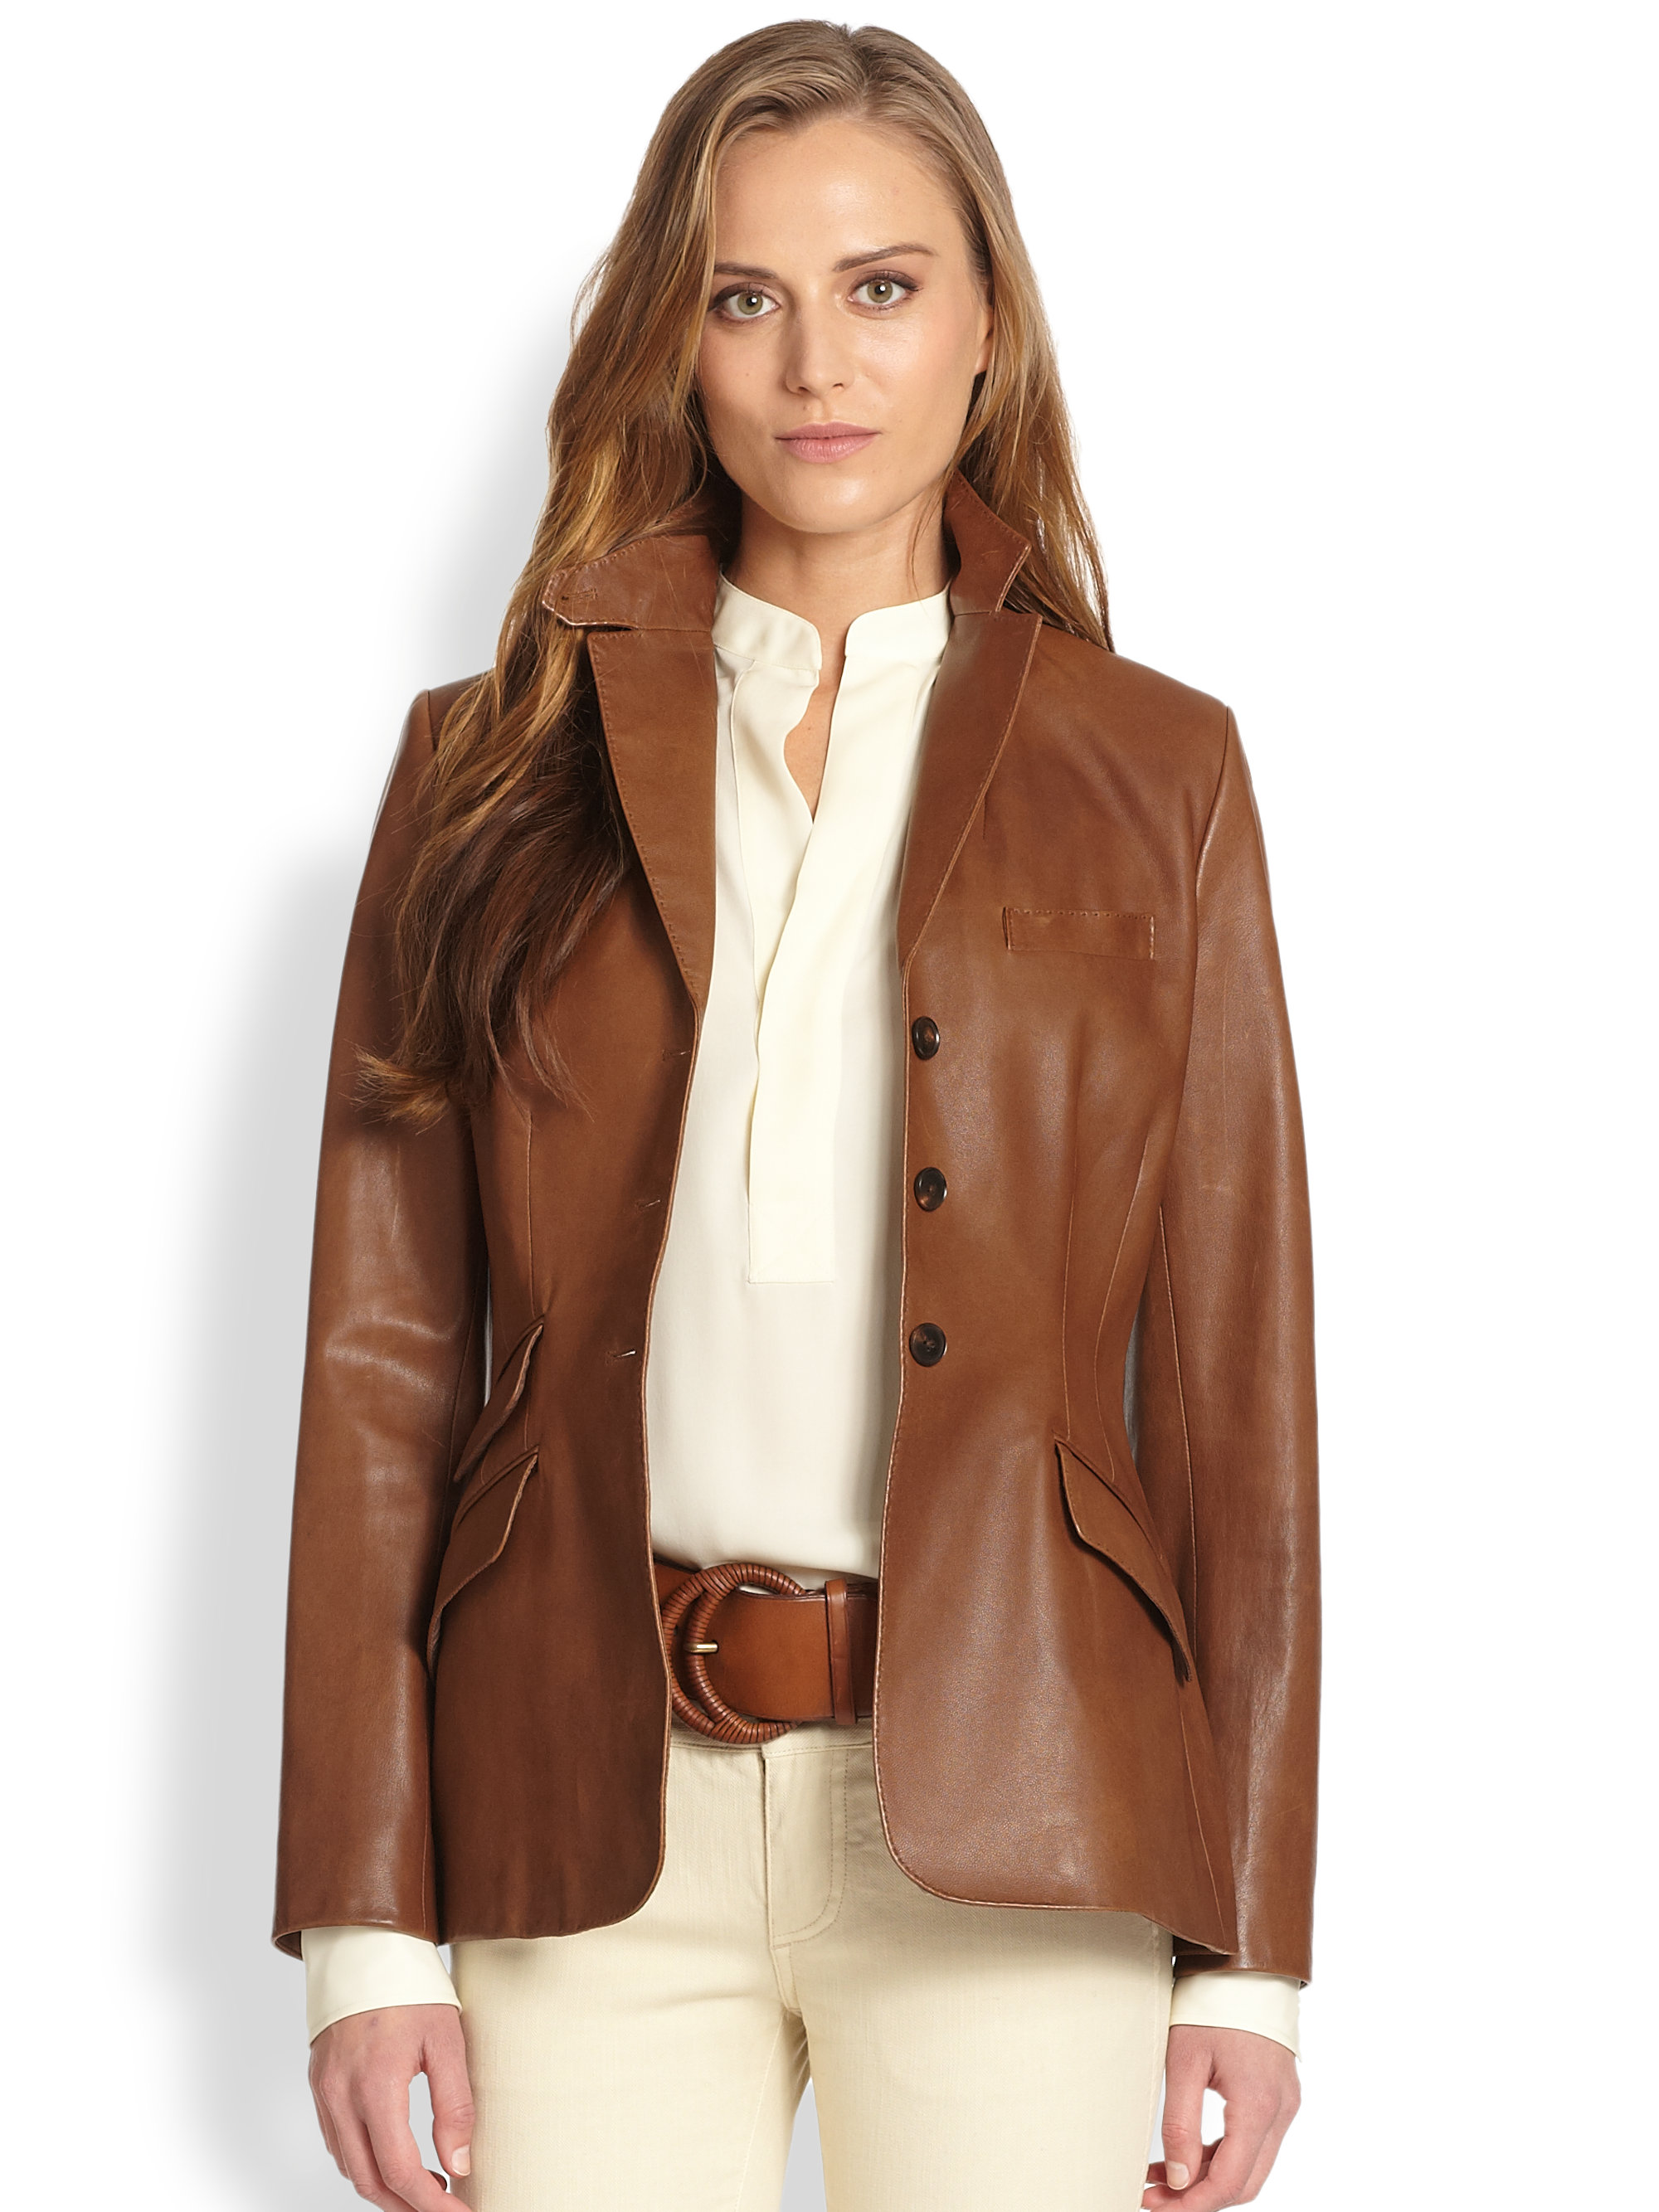 Ralph Lauren Blue Label Custom Leather Riding Jacket in Brown | Lyst